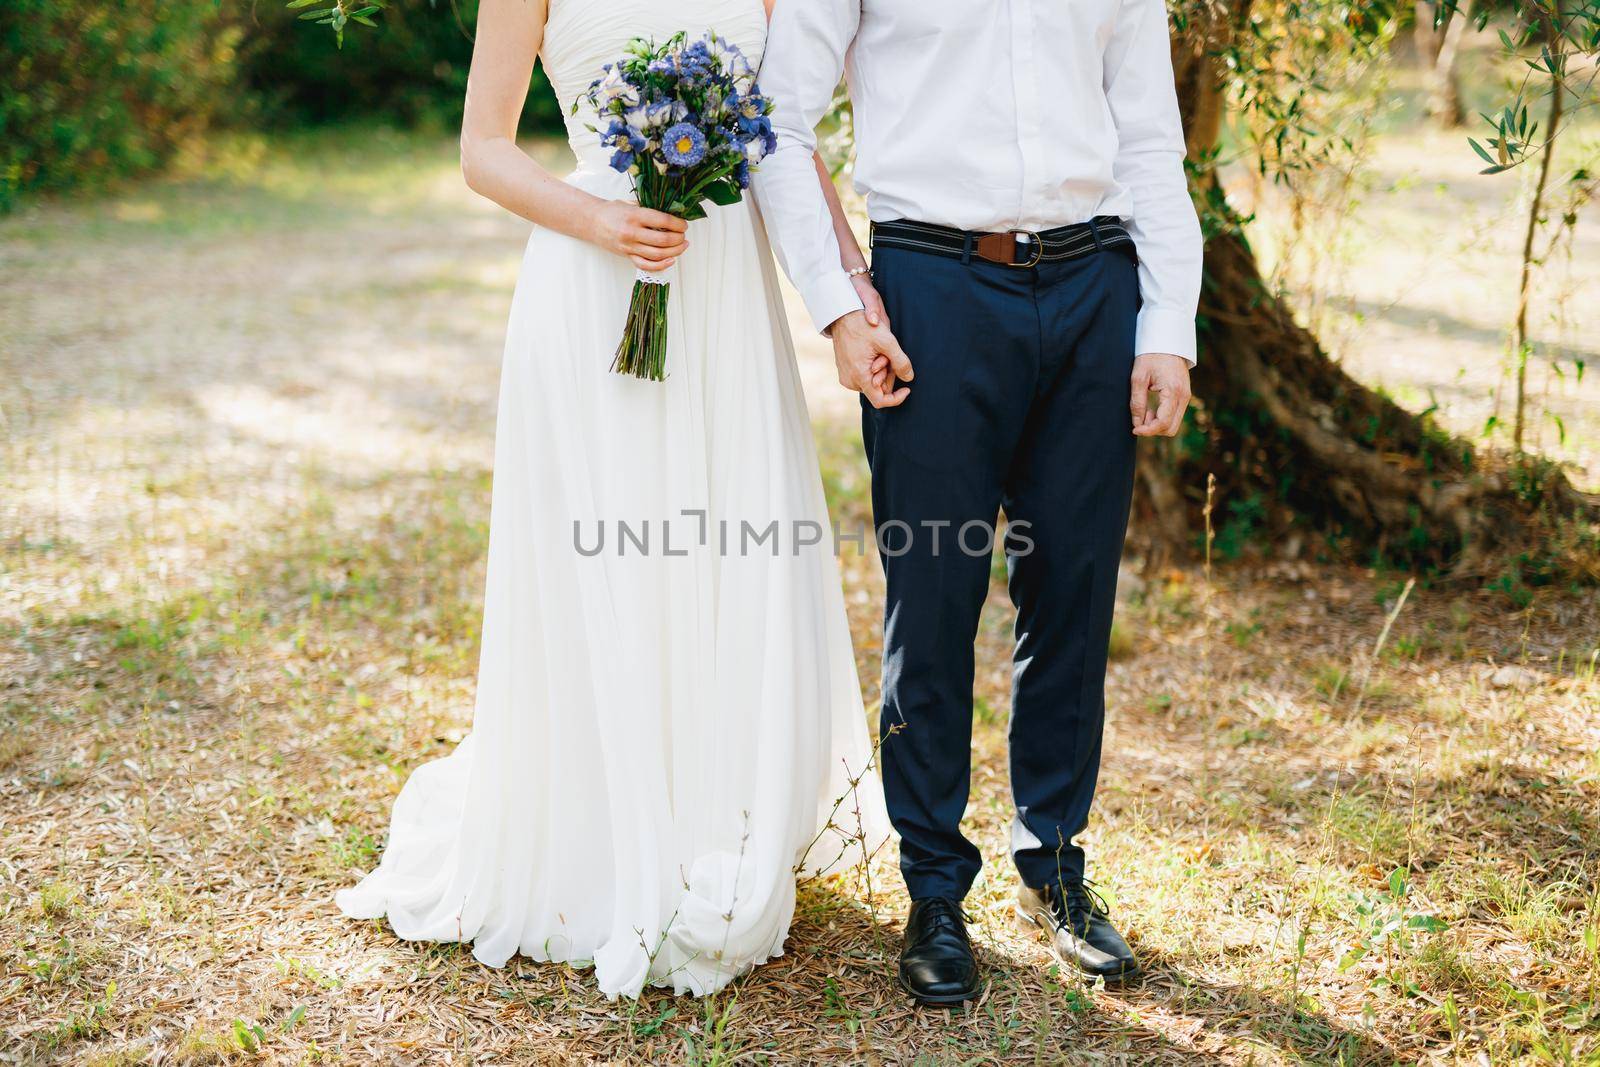 Bride with a bouquet of blue flowers and the groom stand side by side in the olive grove and hold hands. High quality photo